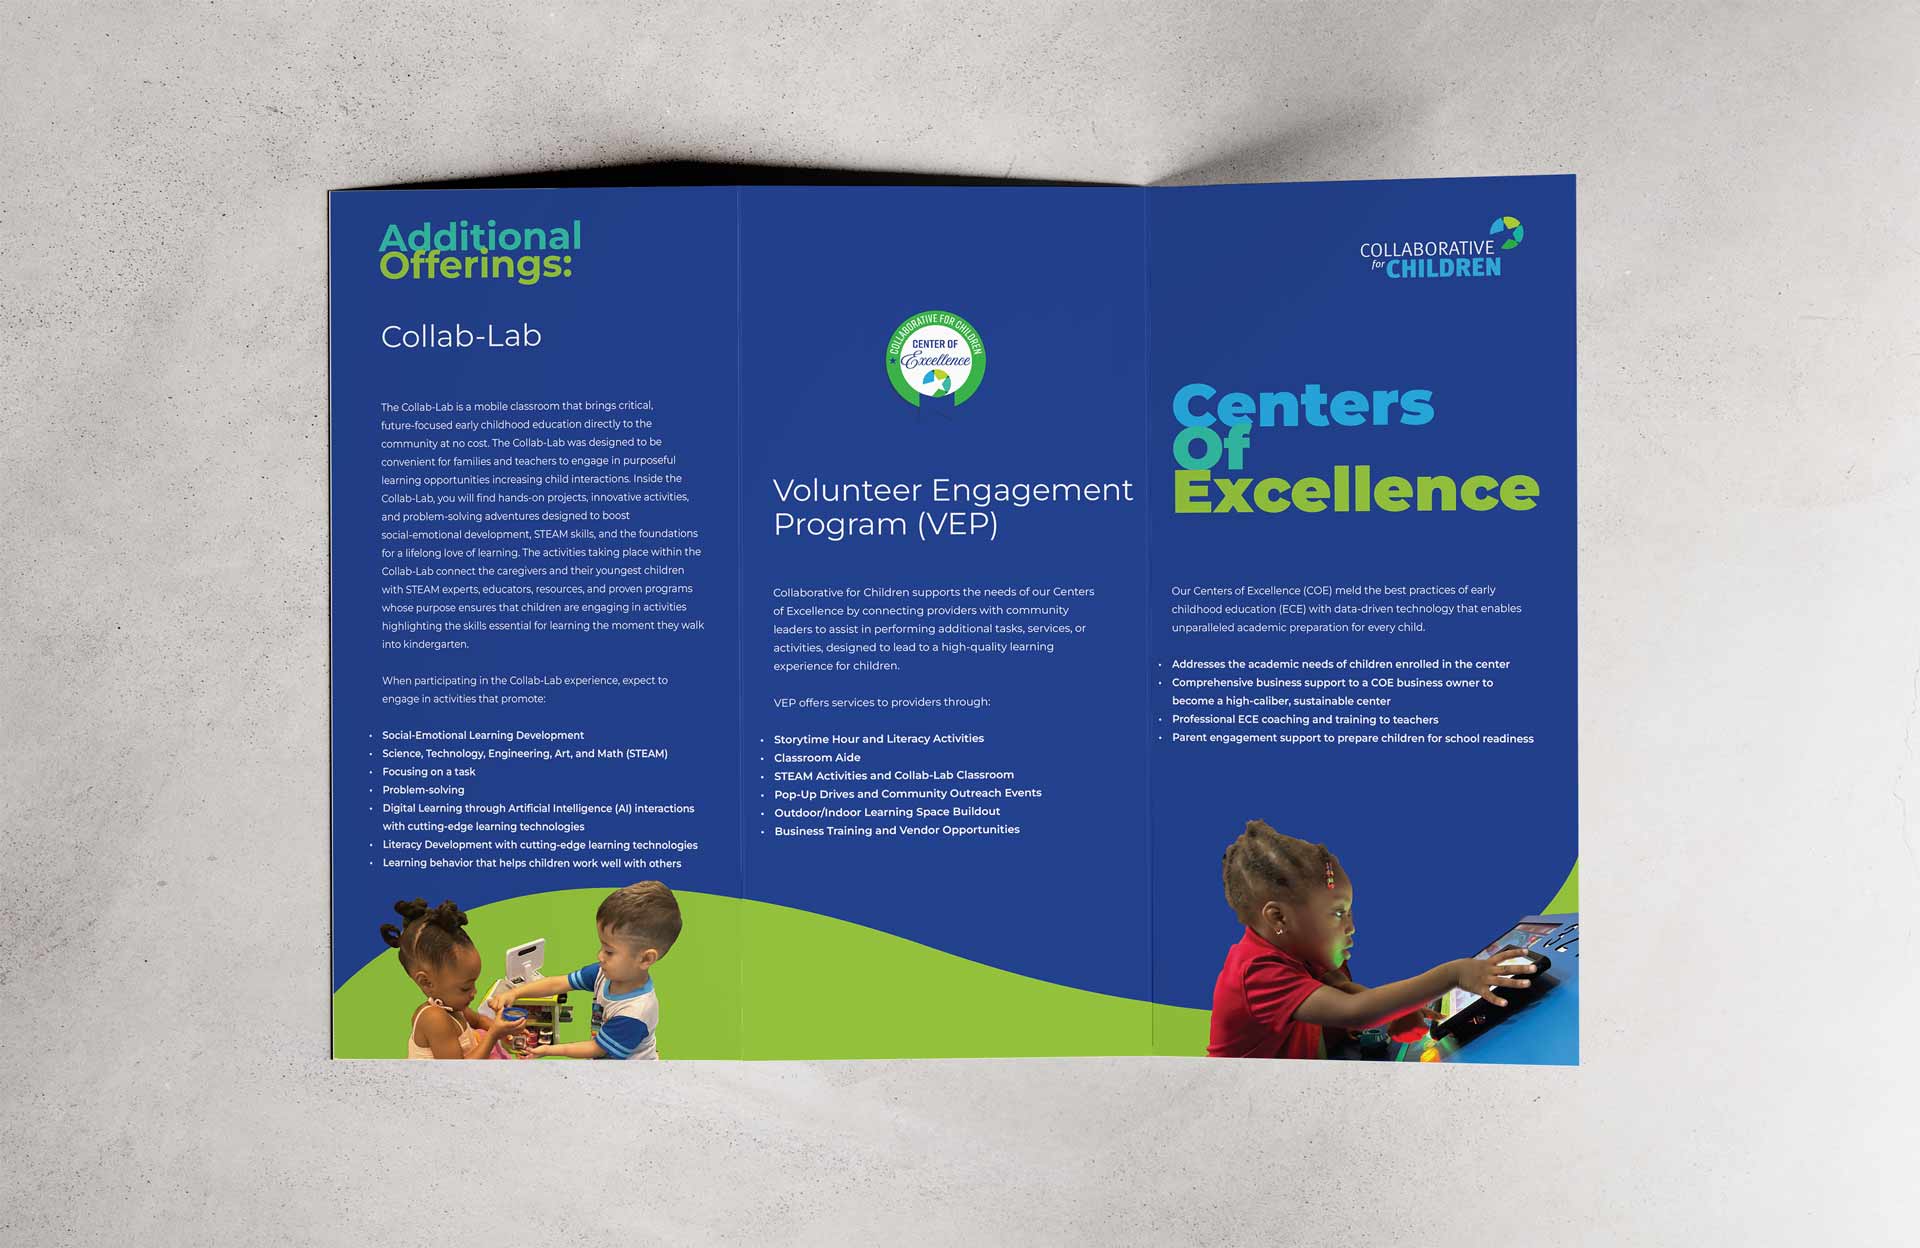 The front and back of the Centers of Excellence trifold brochure.